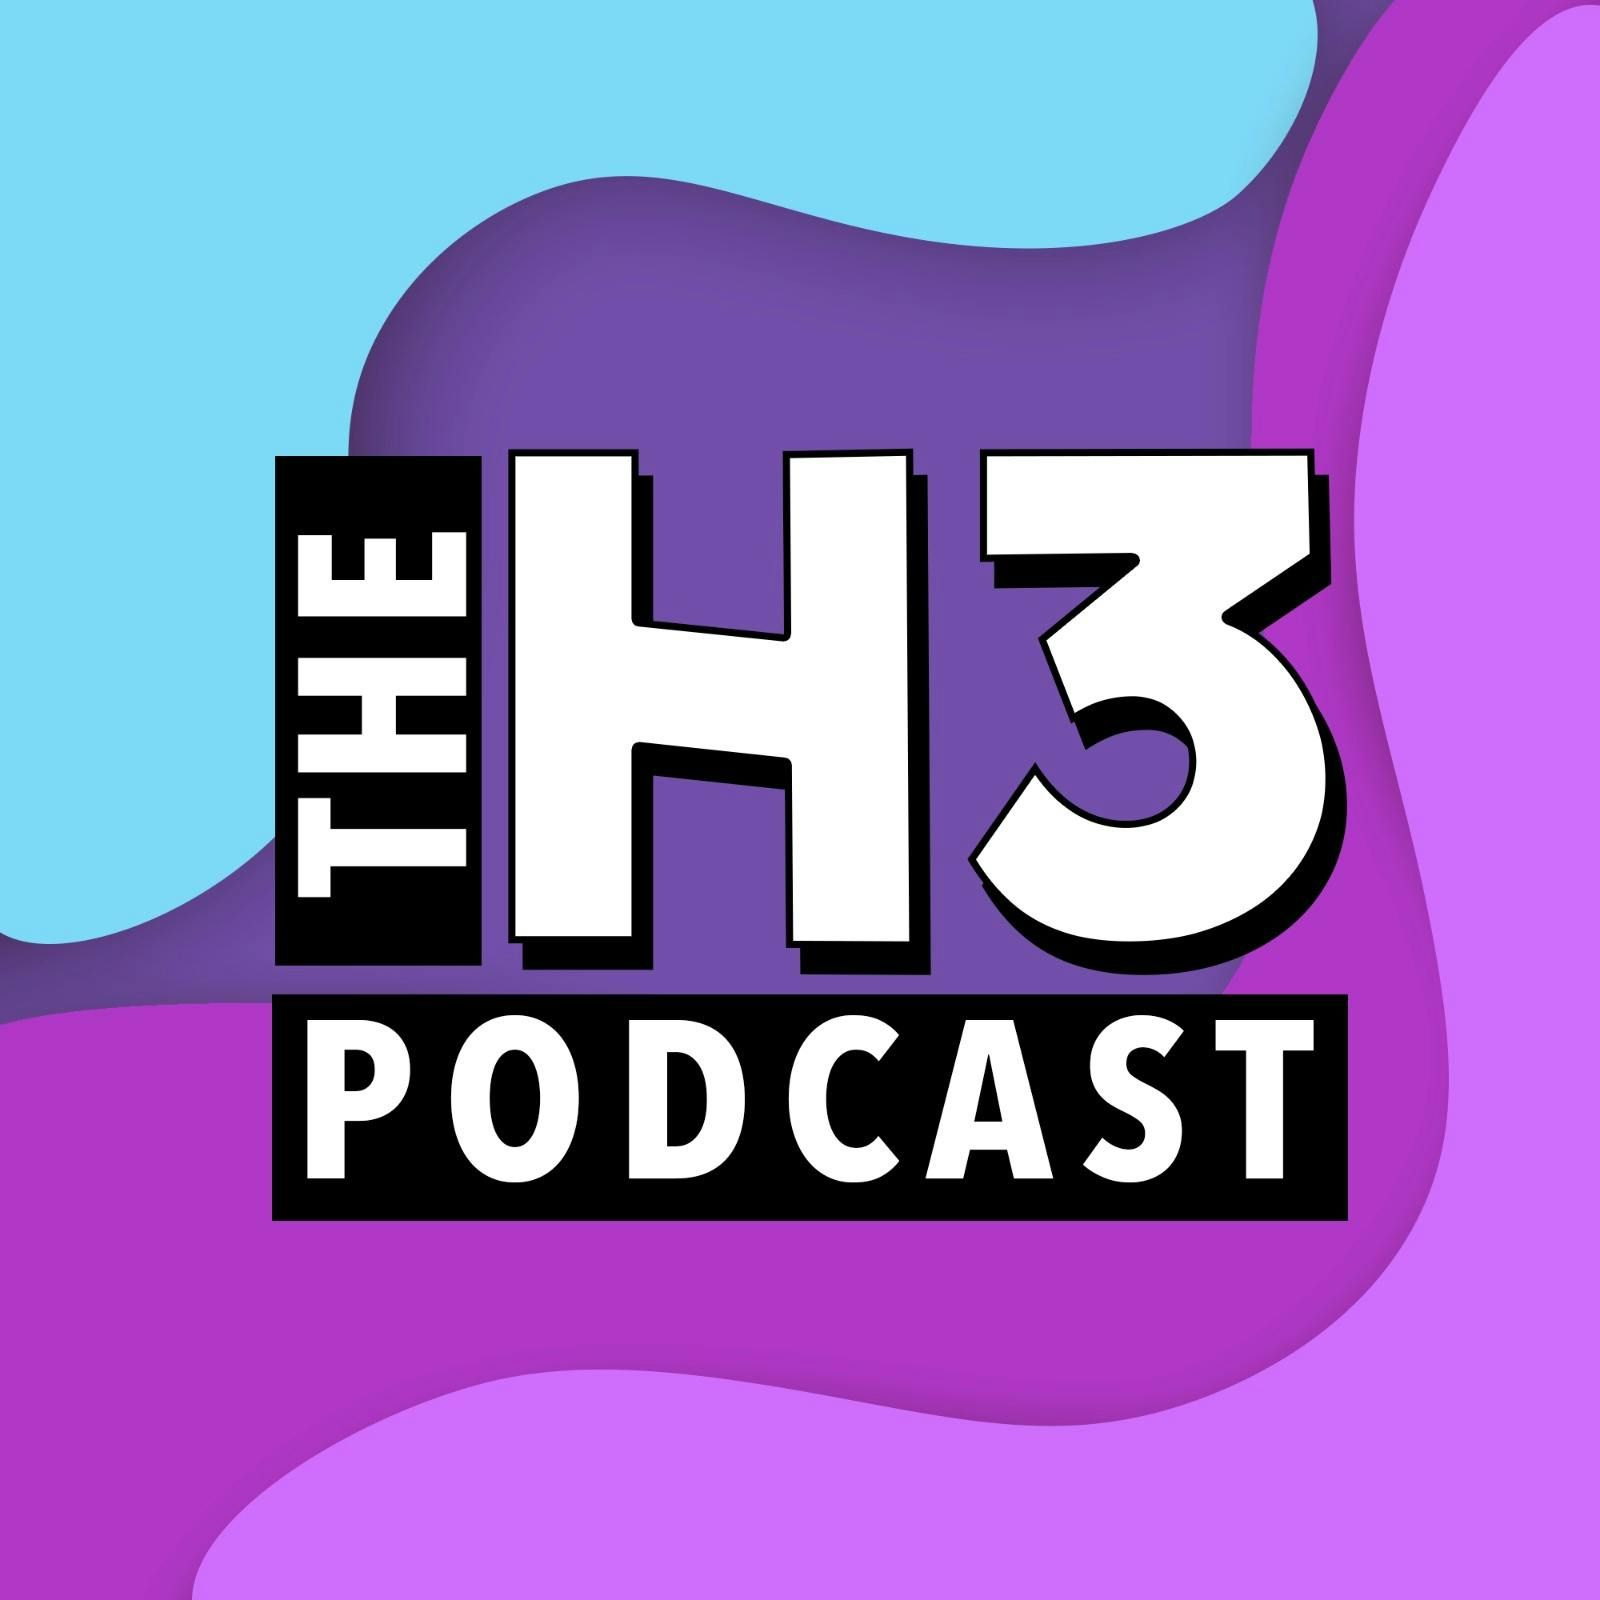 H3 Podcast - The Belle Delphine Mystery & Our New Studio - H3...